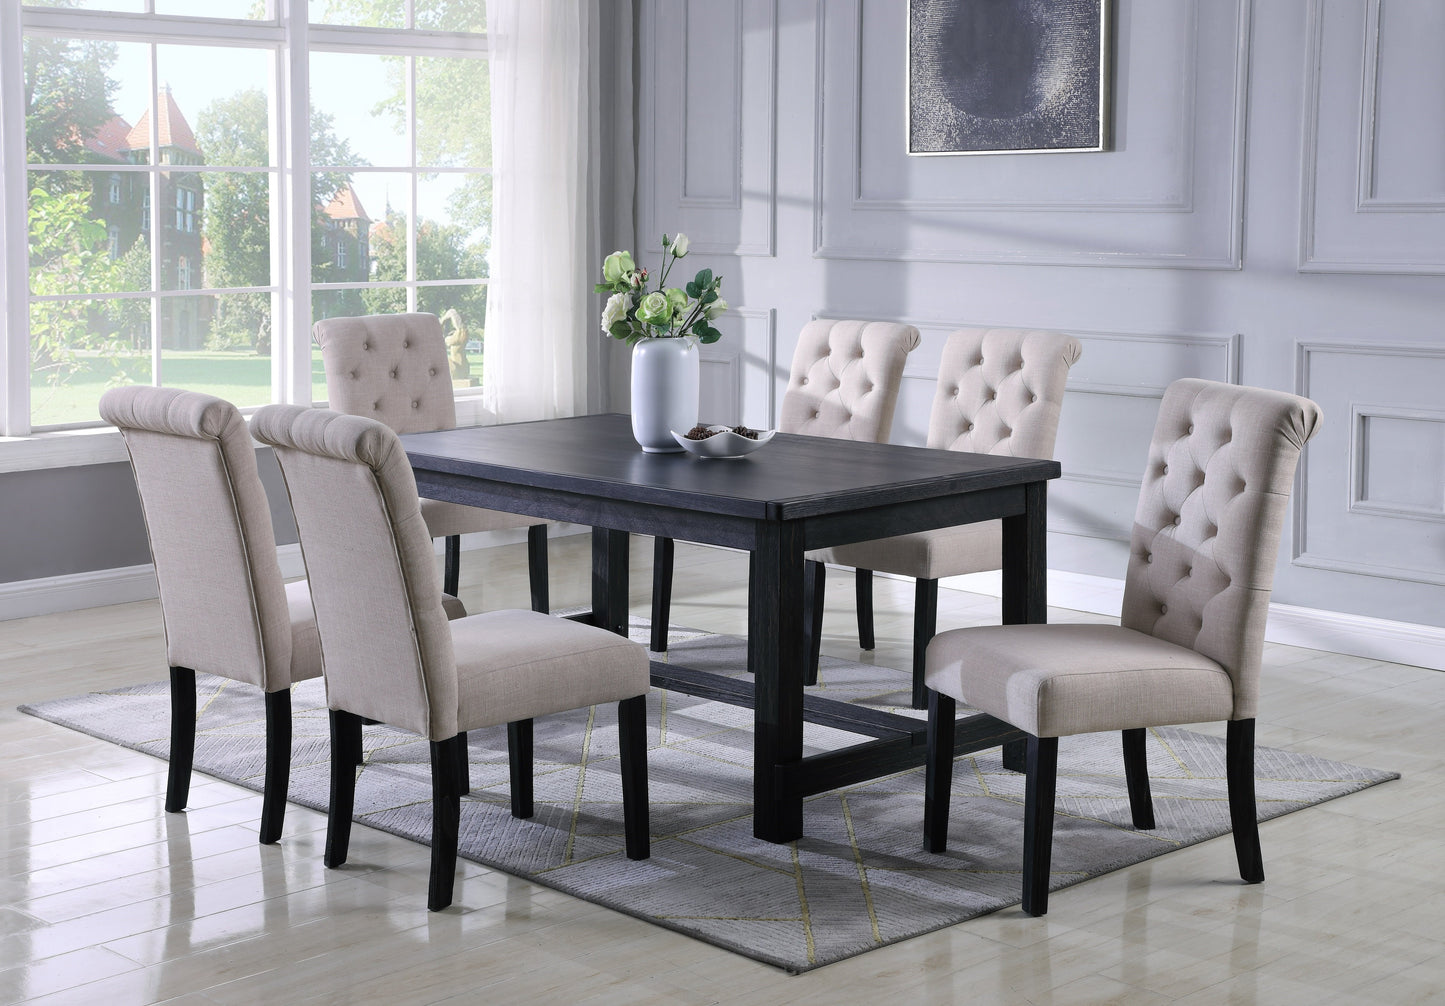 Leviton Antique Black Finished Wood Dining Set, Table with Six Chair, Tan